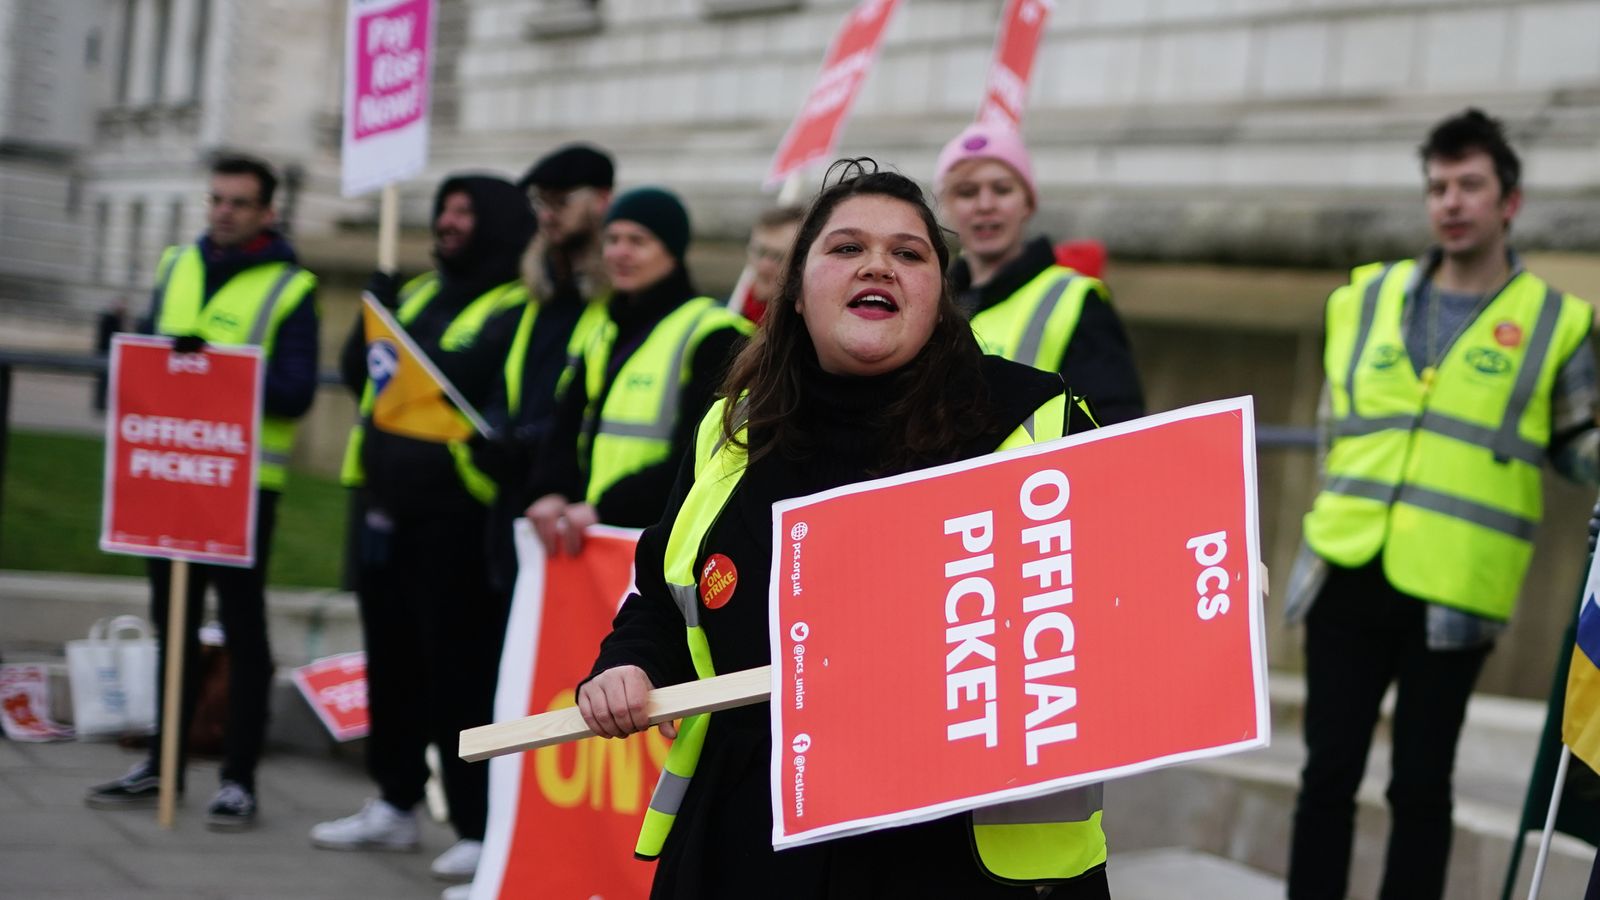 33,000 more civil servants to join 100,000 already walking out next month